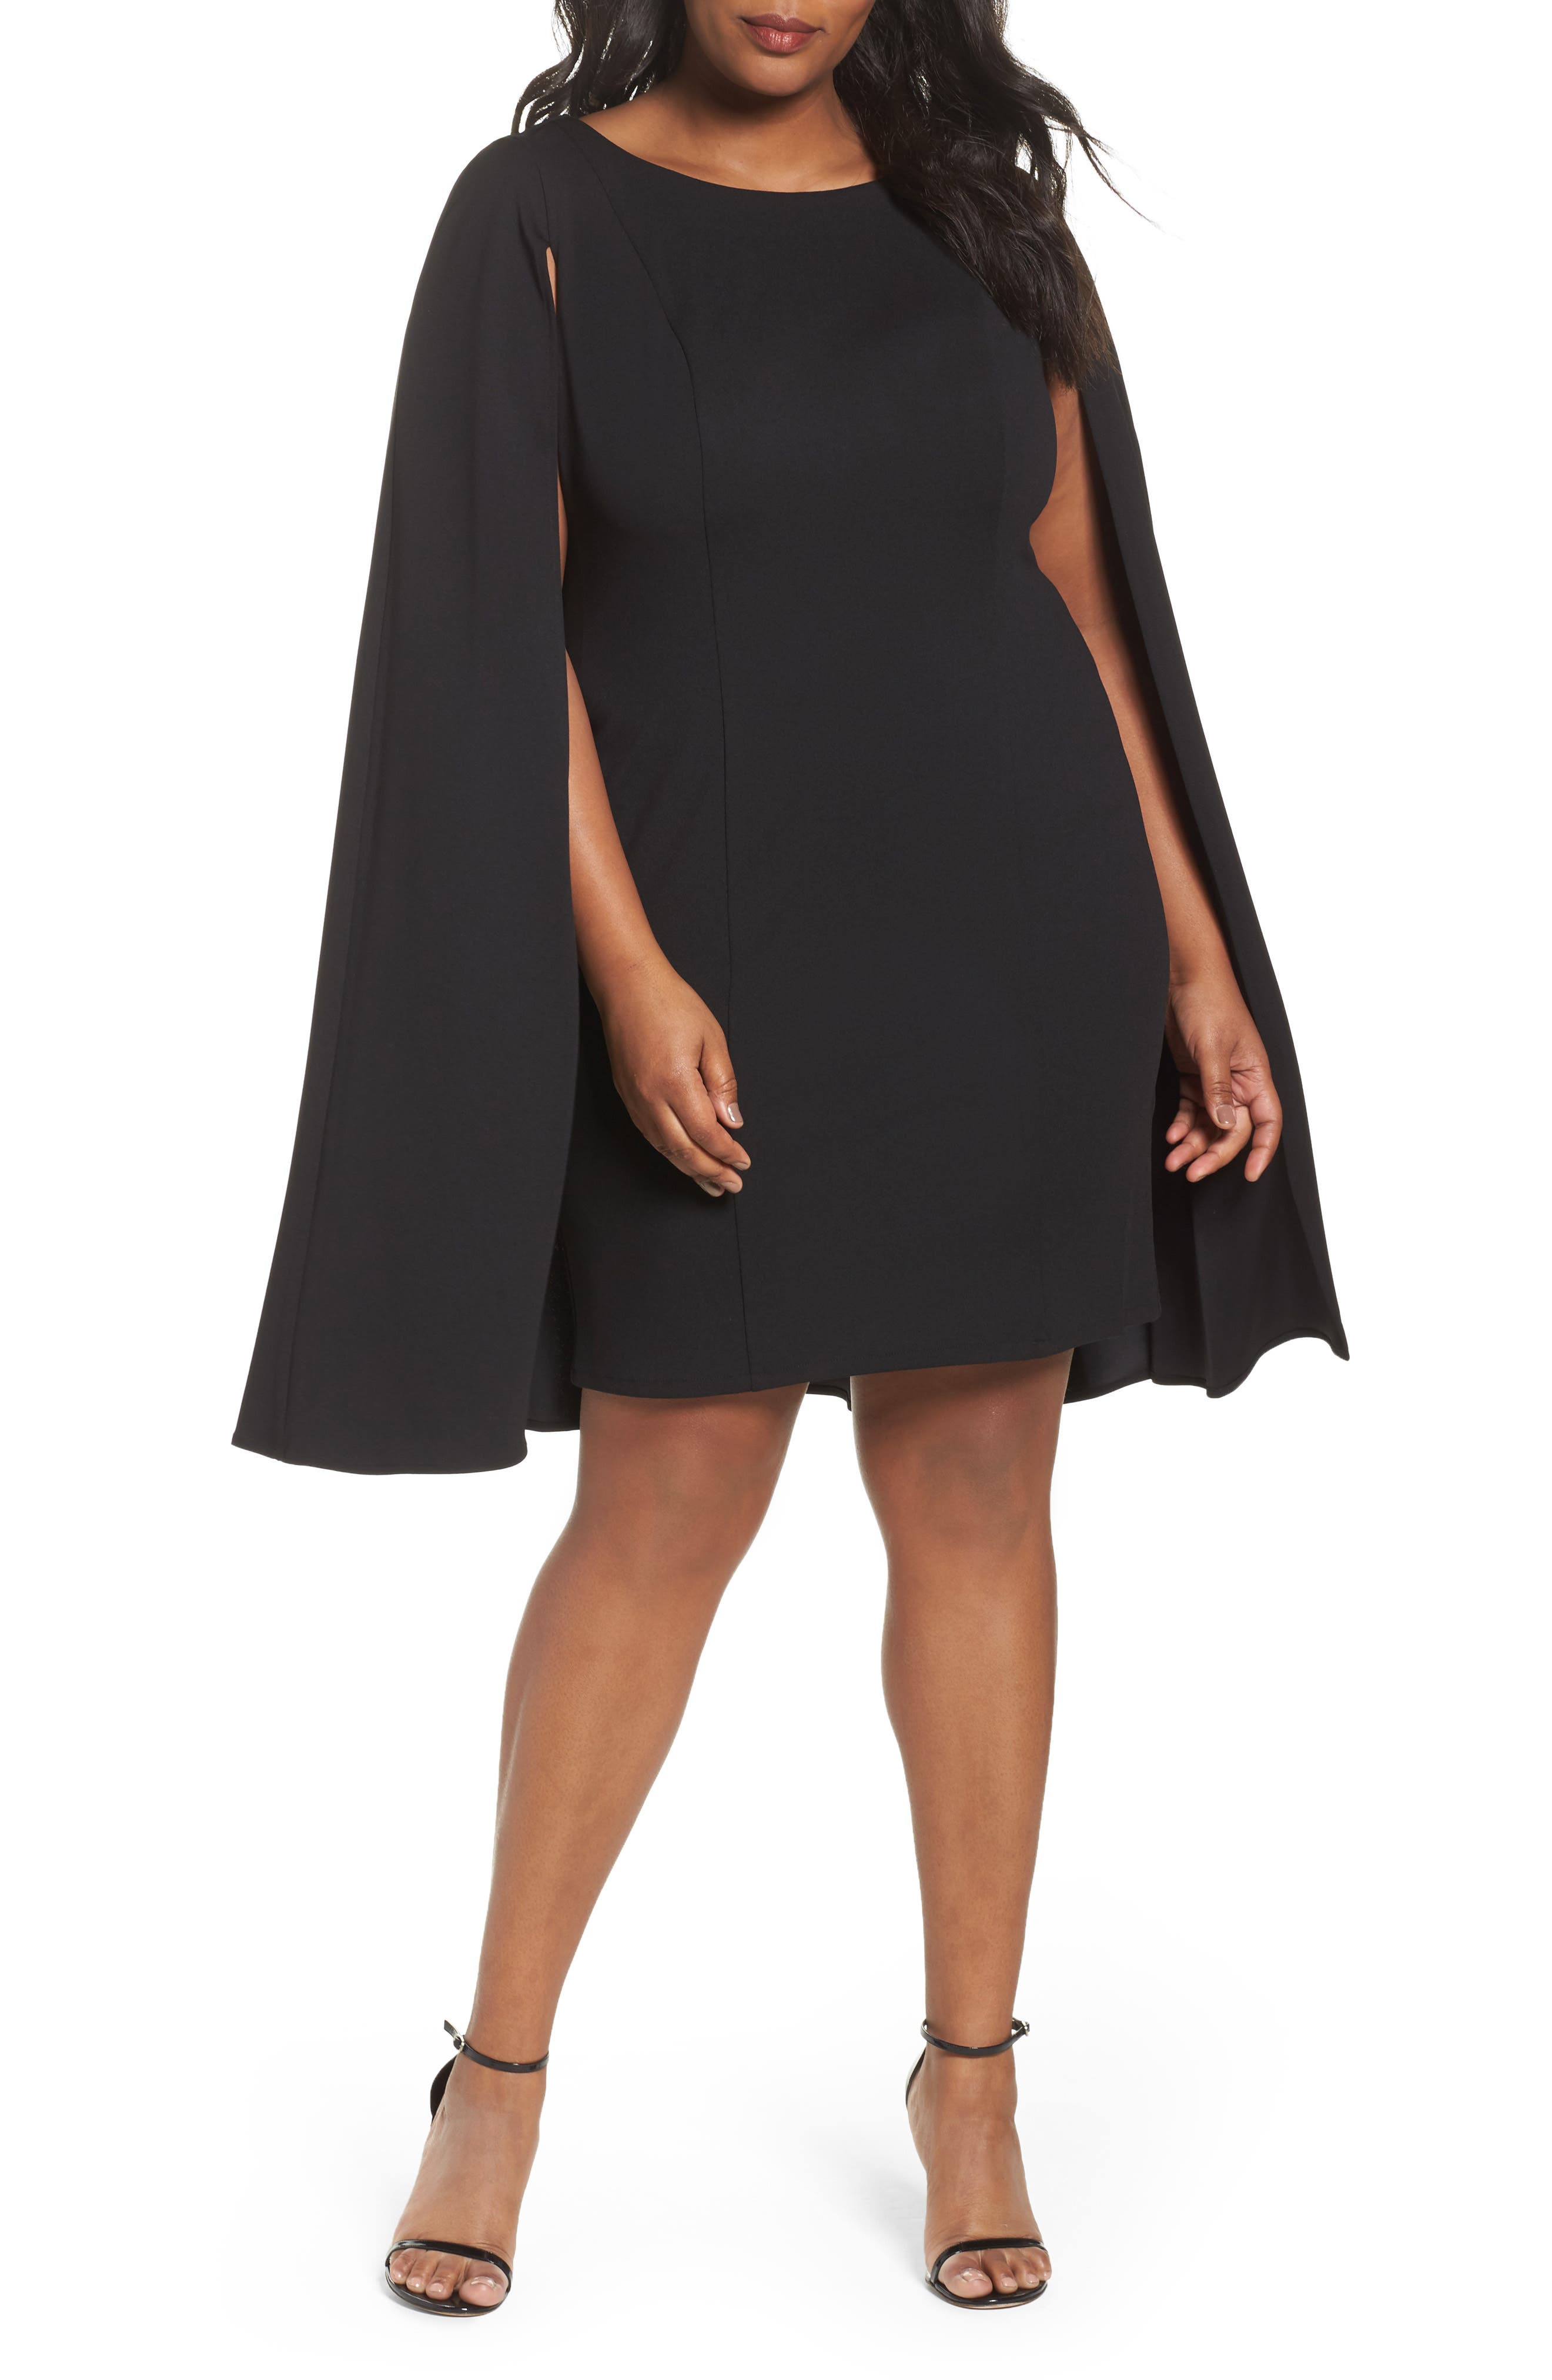 adrianna papell plus size dresses nordstrom